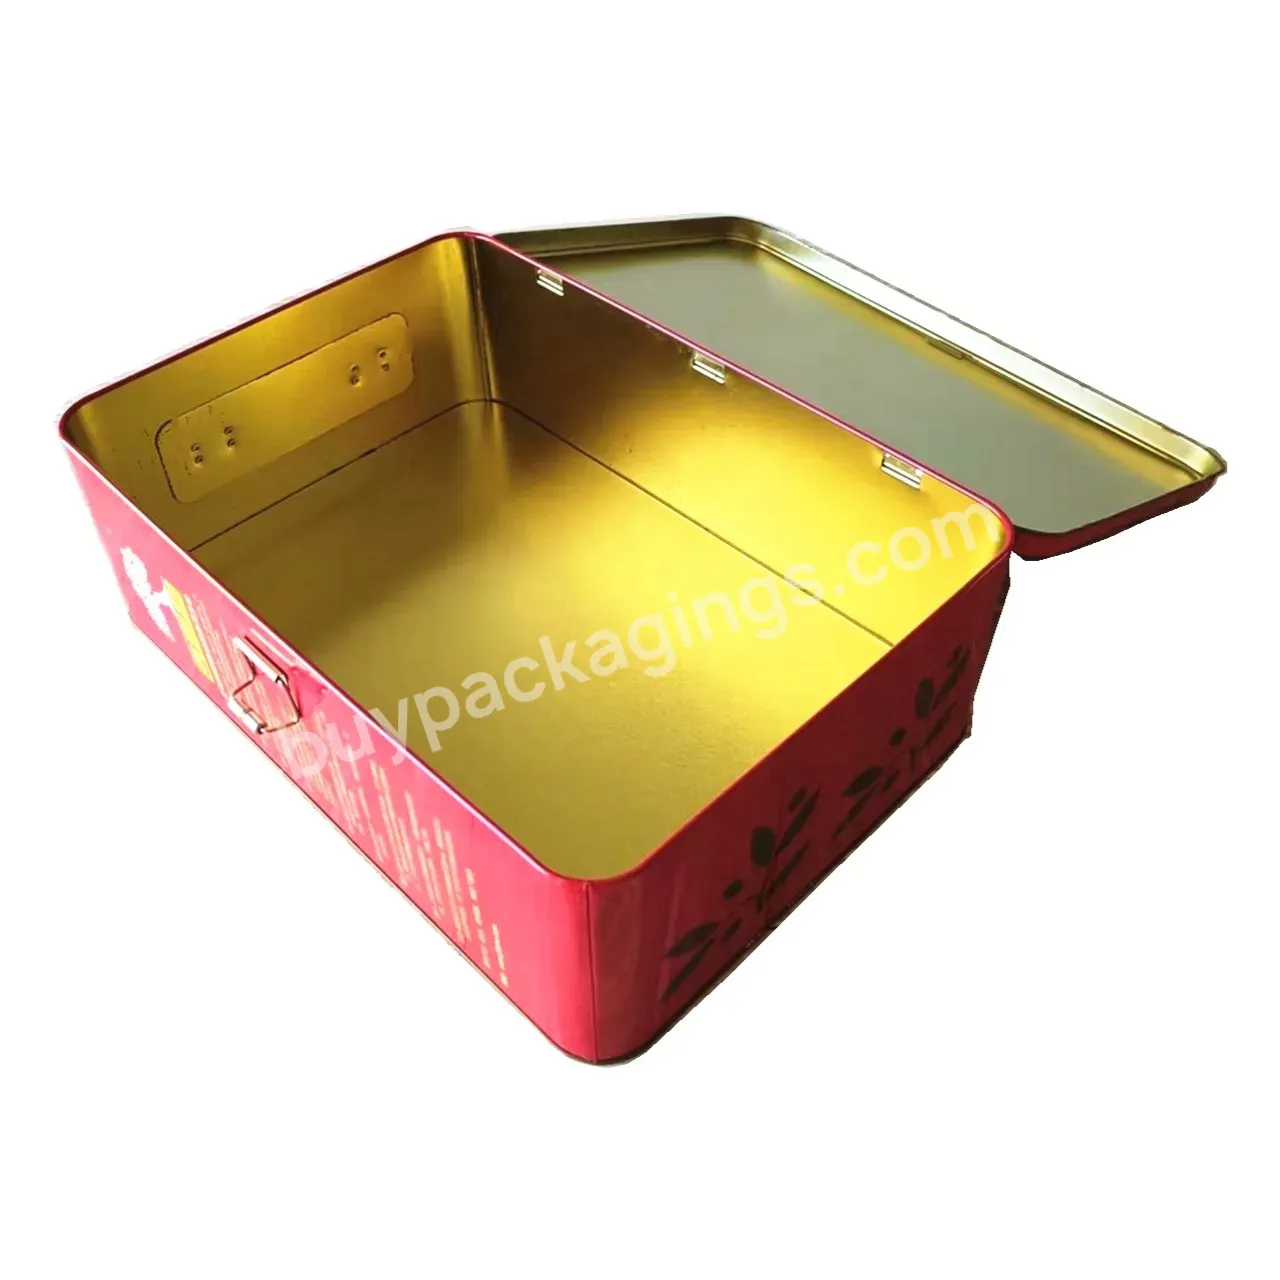 Factory Customize Produce Large Tin Box With Handle And Lock For Olive Oil,Whisky,Brandy,Wine Bottles Packaging - Buy Wine Metal Box Large Rectangle,Brandy Metal Box Large Size,Olive Oil Bottles Metal Tin Box Large.